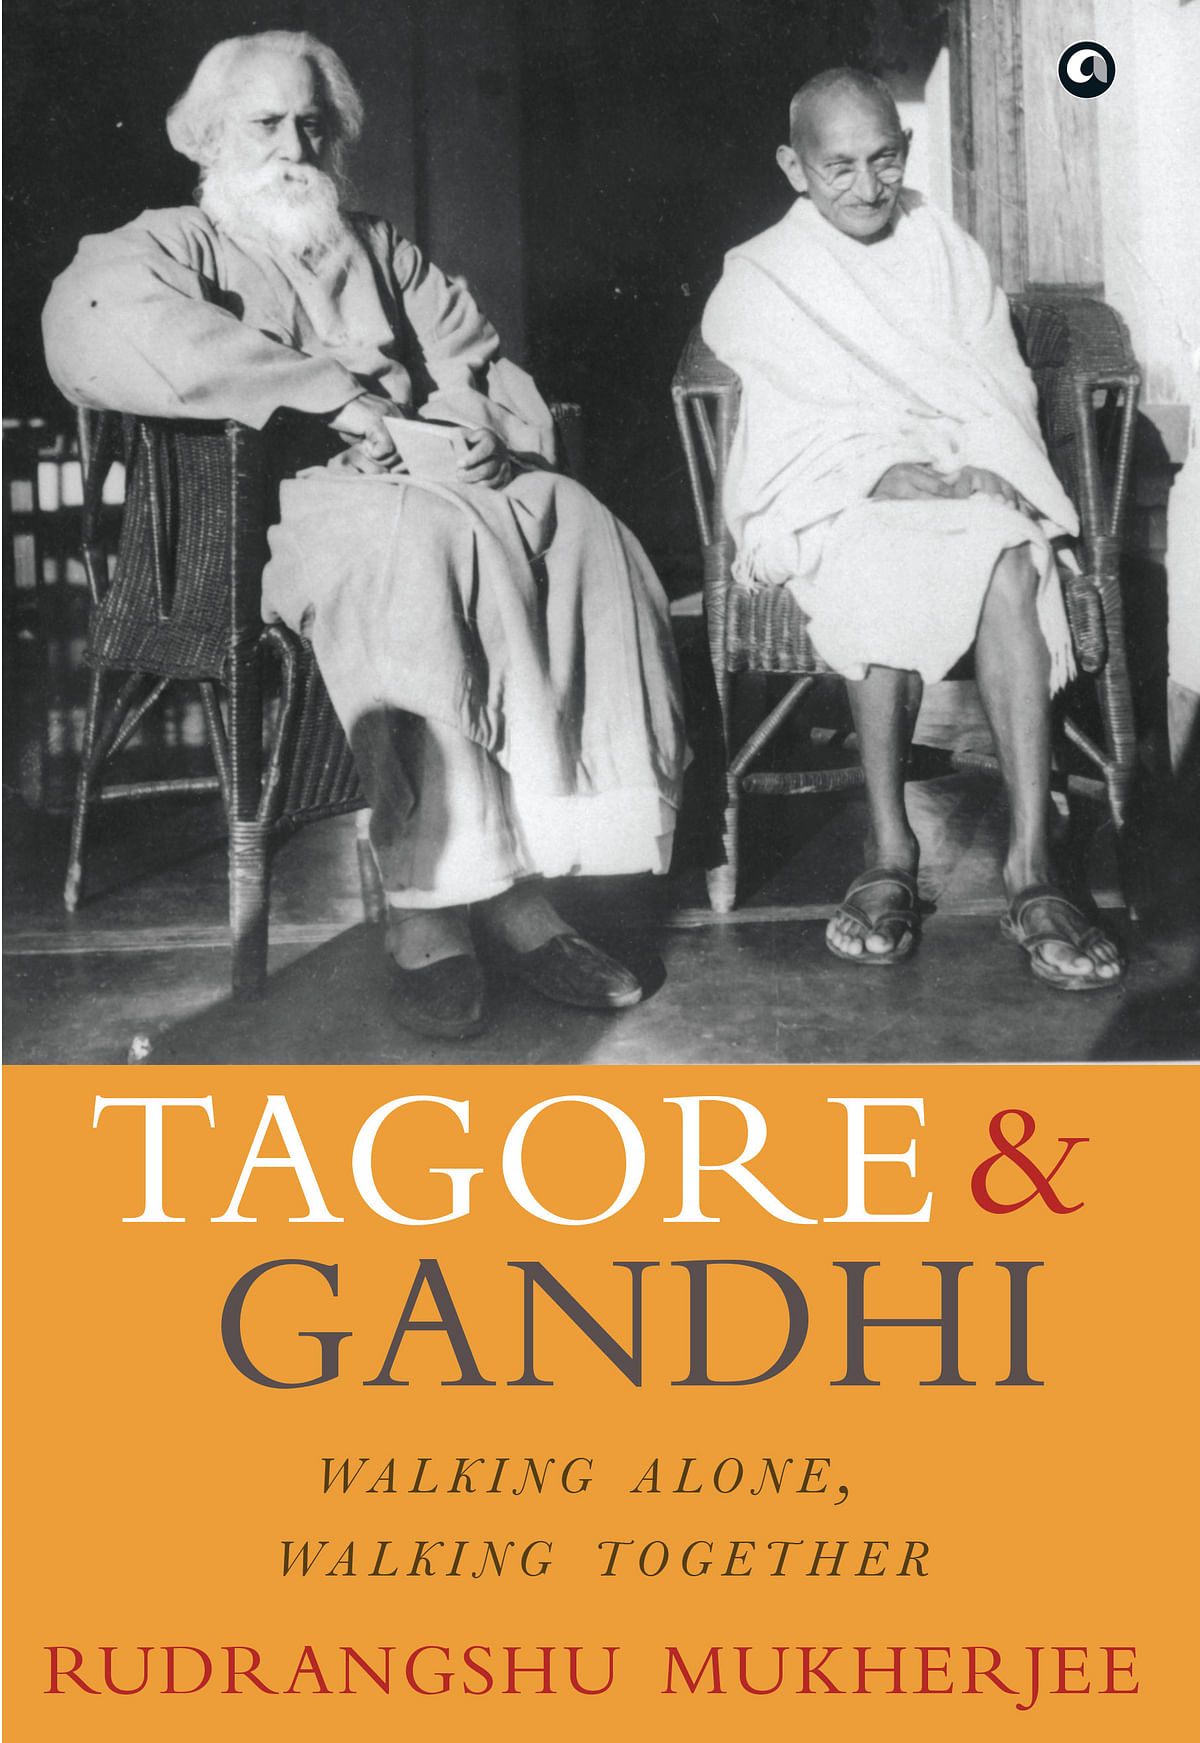 BOOK EXCERPT: Gandhi tried to infuse a spirit of self-help among students, but the experiment caused controversy. 